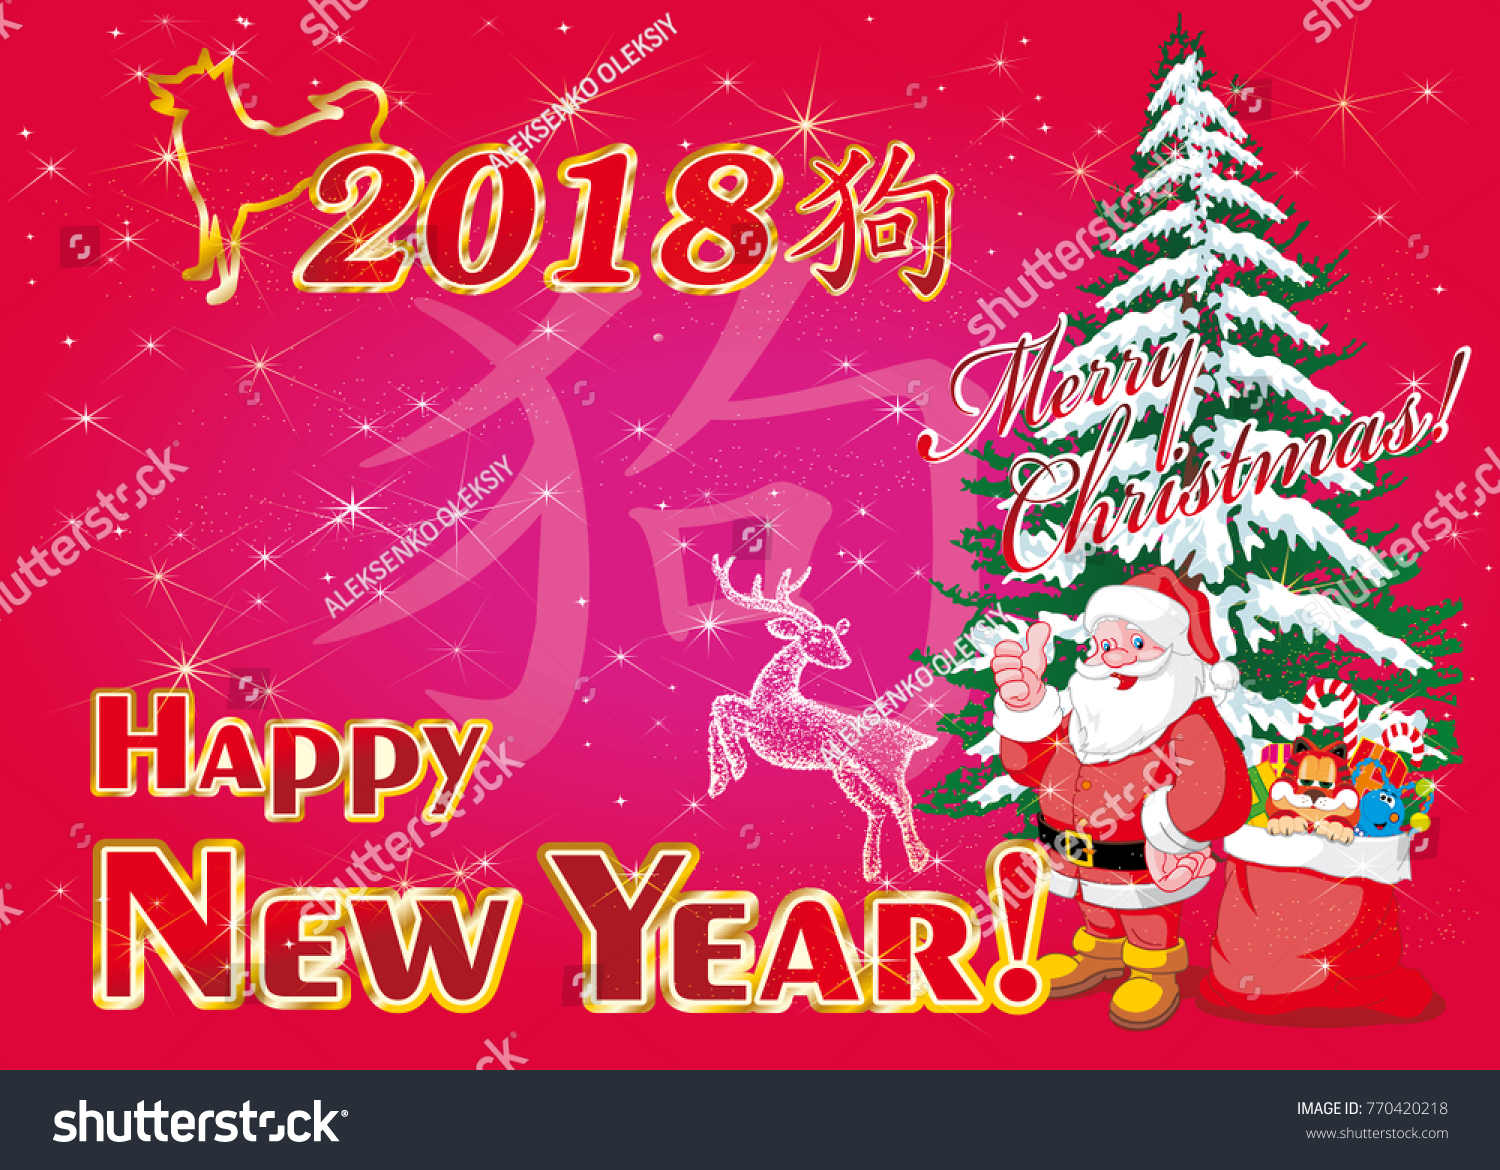 Postcard Happy New Year 2018 Card on a red background Chinese year of